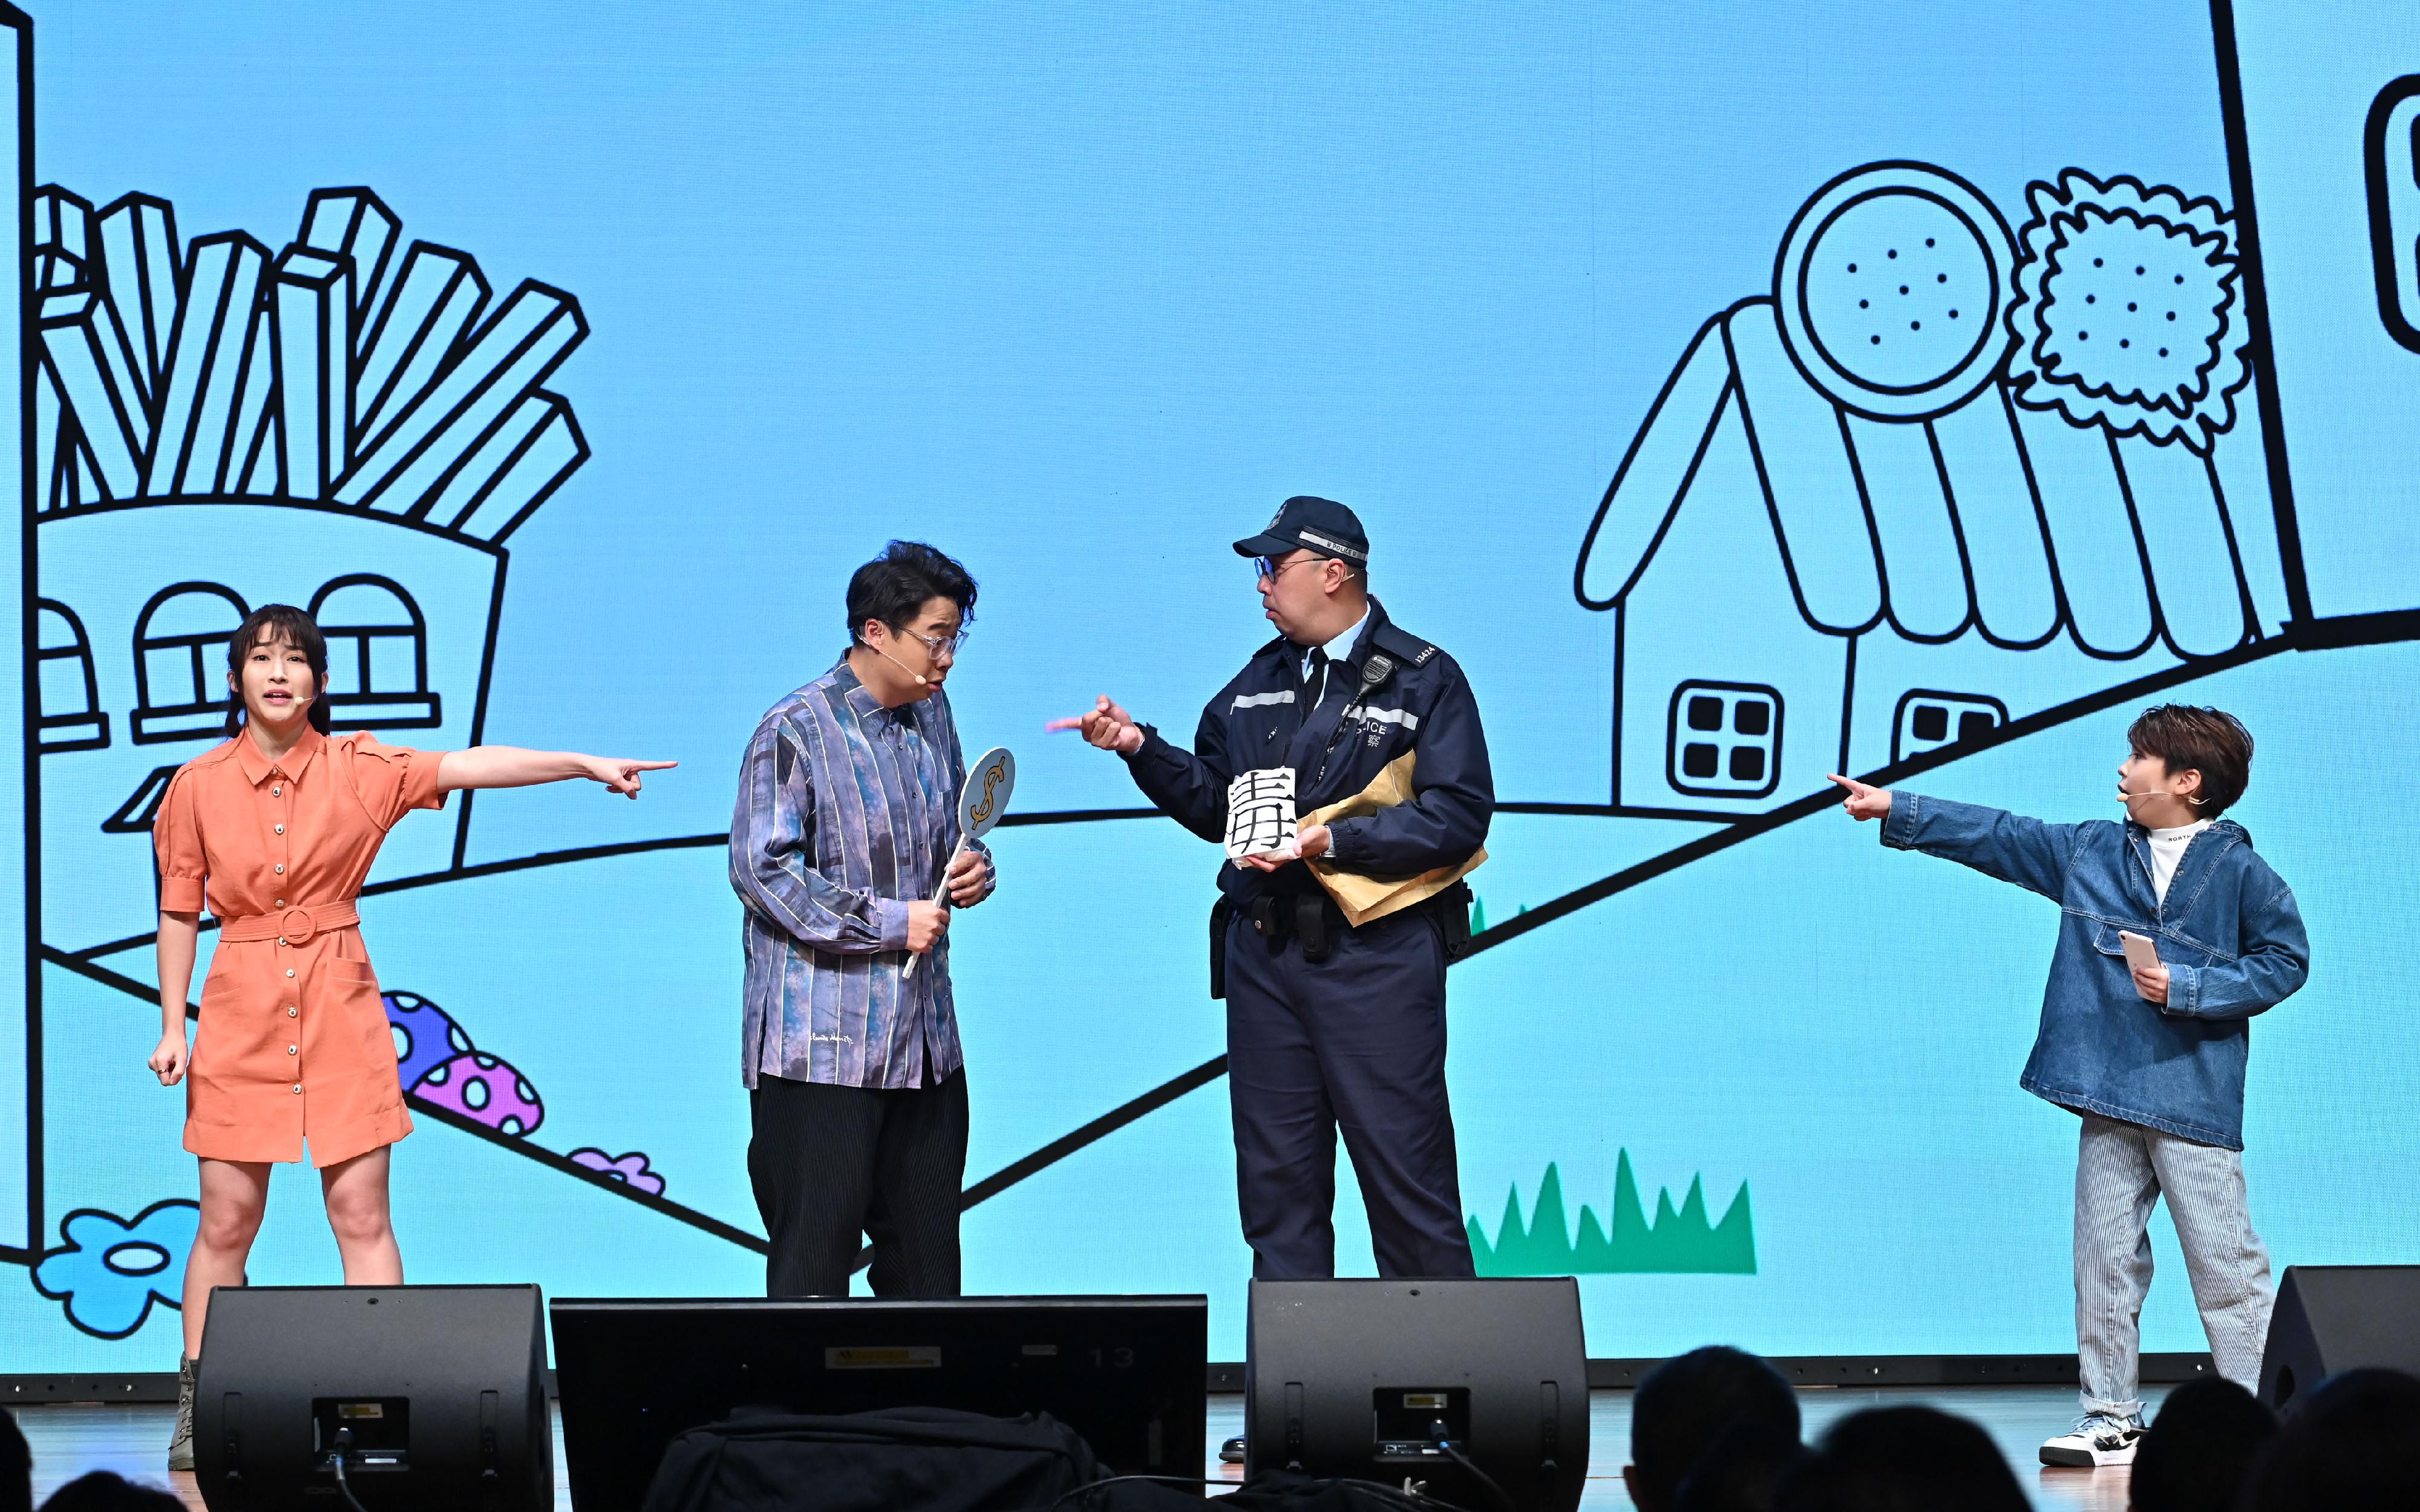 The Good Citizen Award 2022 cum 50th Anniversary Presentation Ceremony was held today (February 26). Photo shows a drama performance to disseminate anti-crime messages.